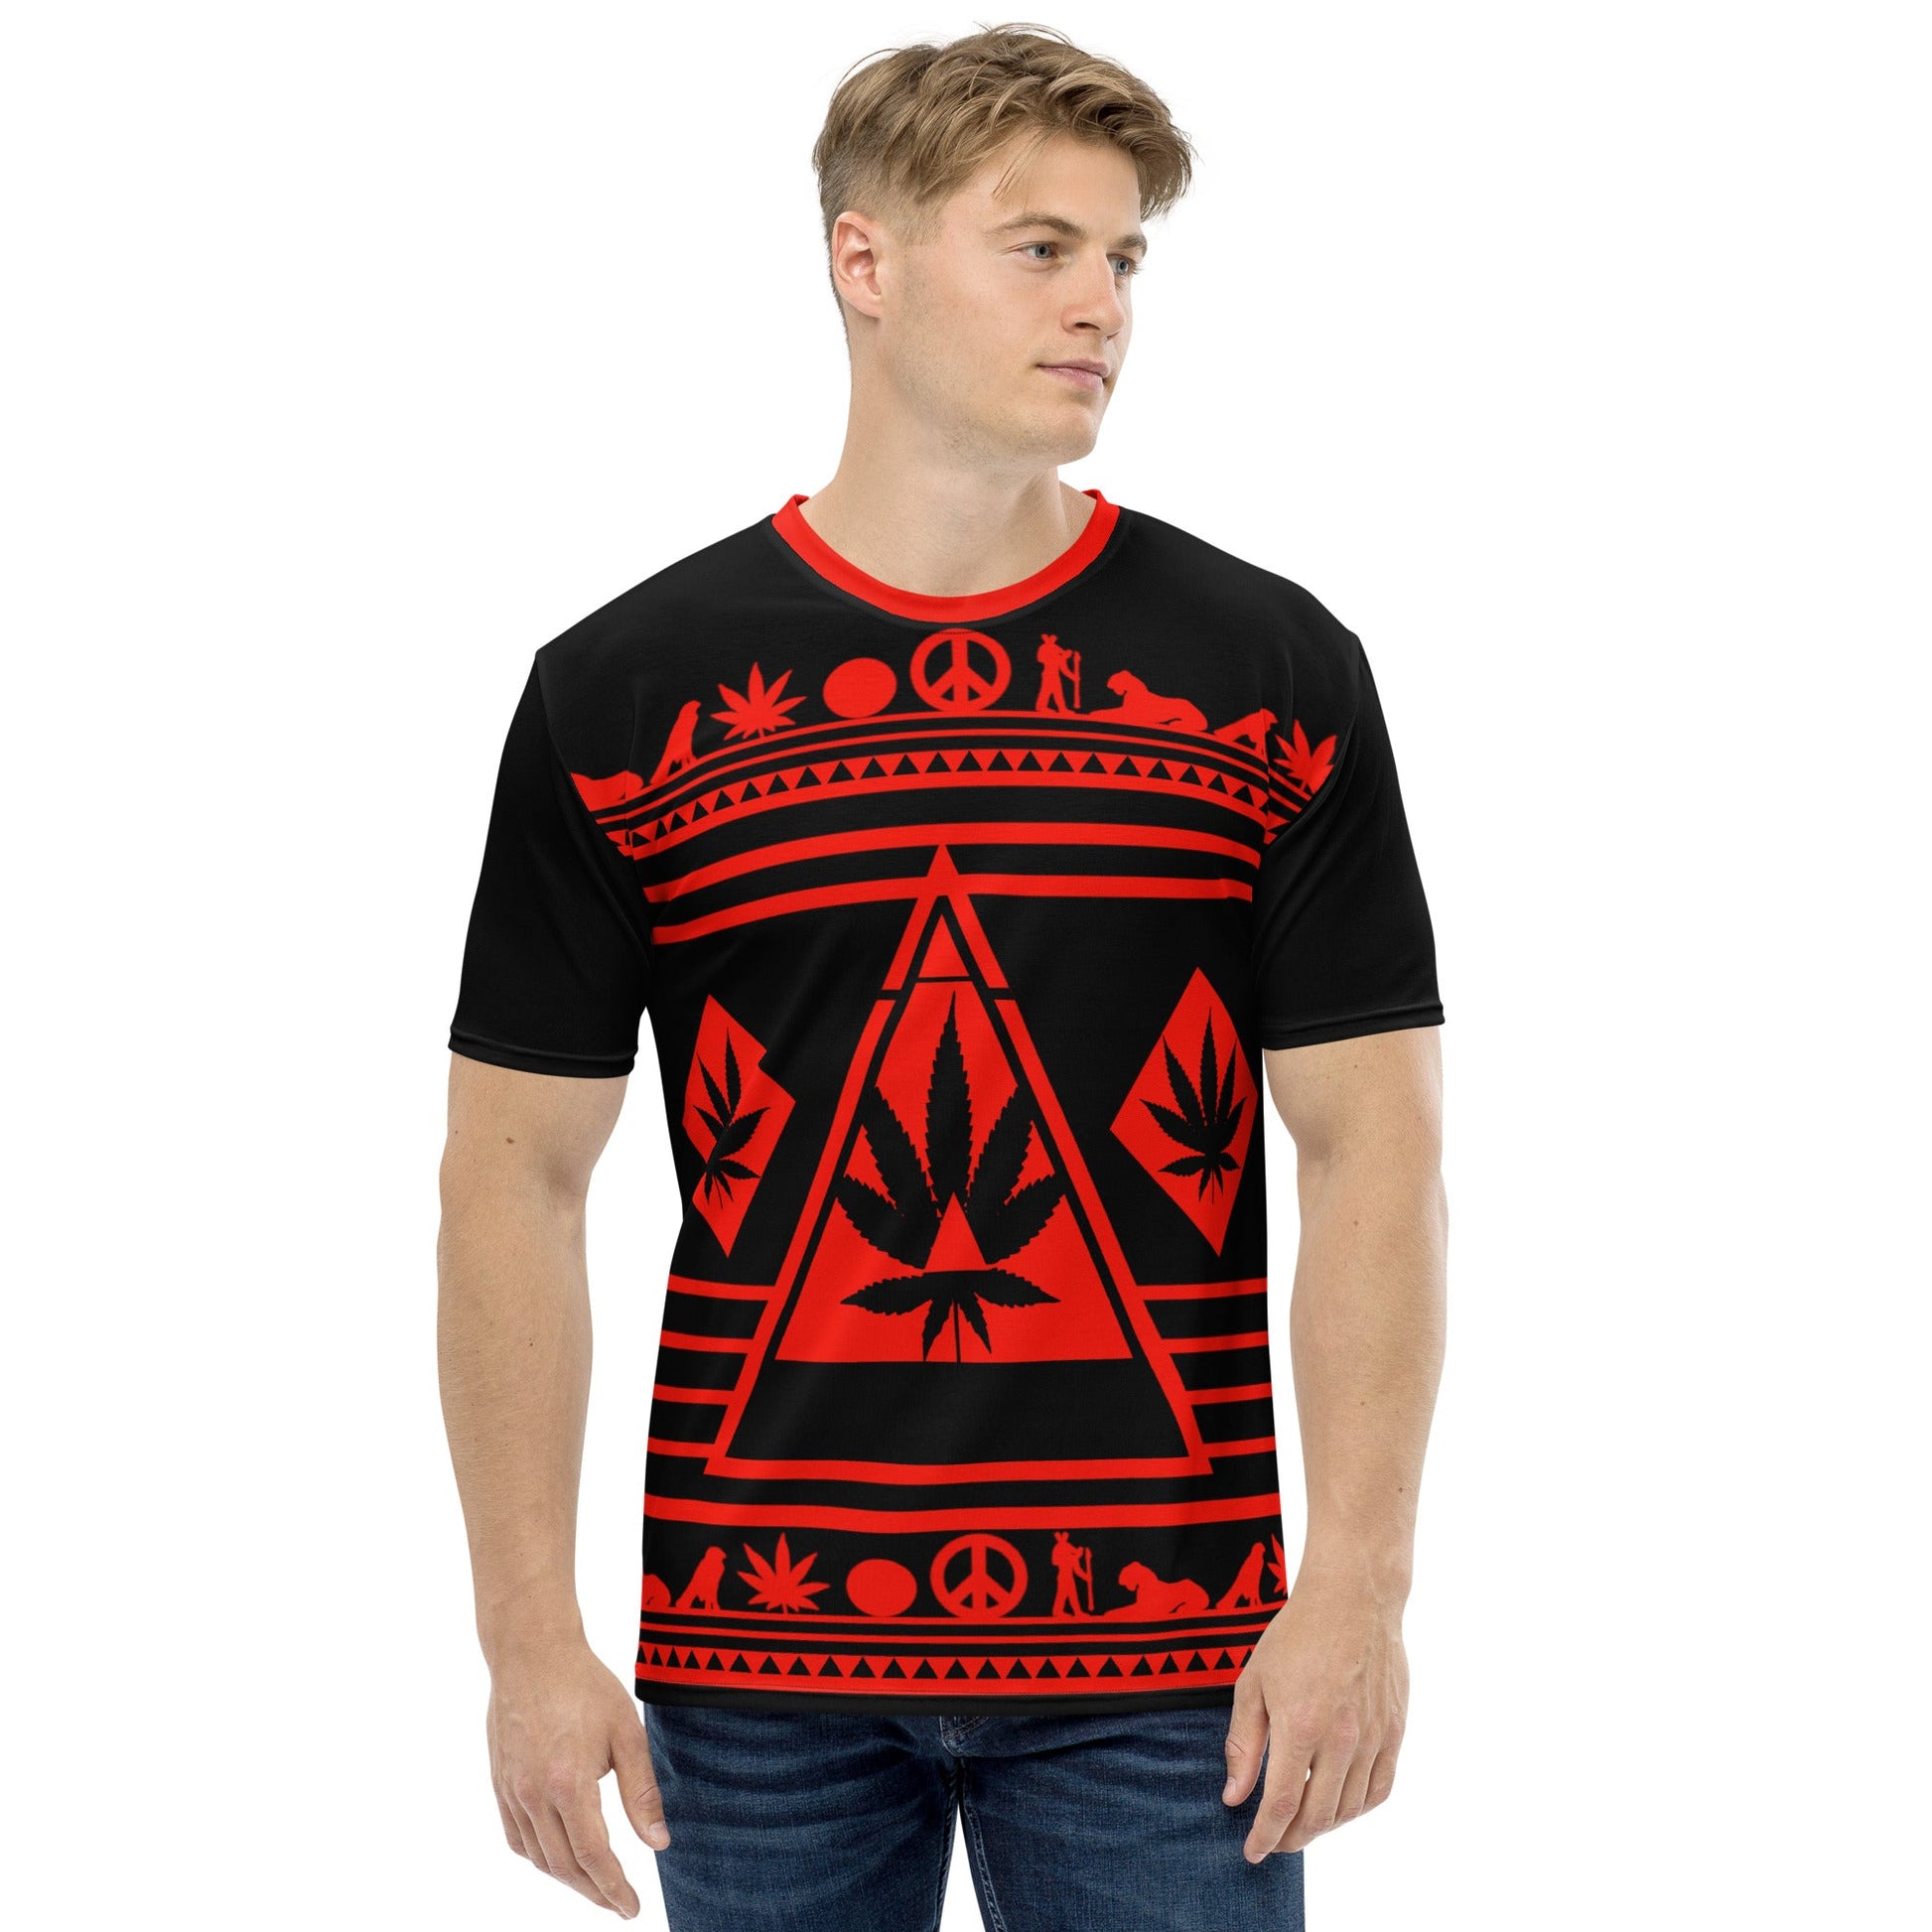 black and red graphic shirt